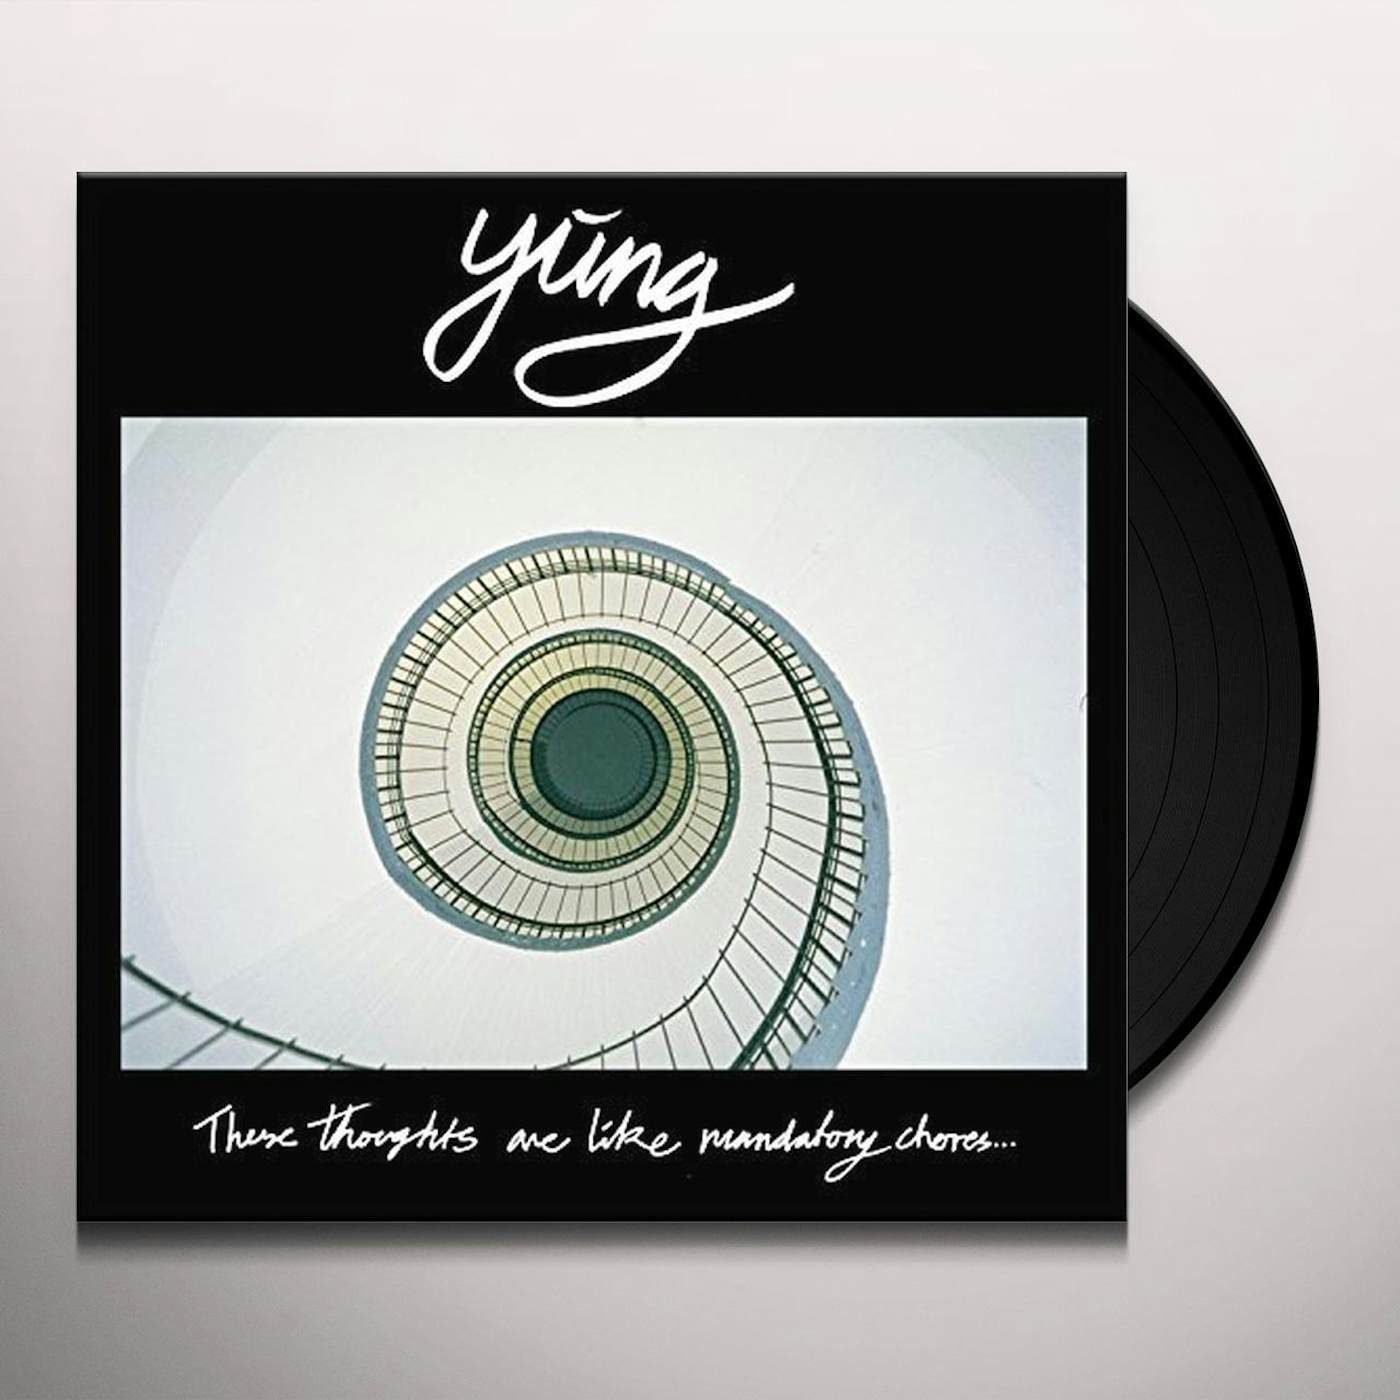 Yung These Thoughts Are Like Mandatory Chores Vinyl Record